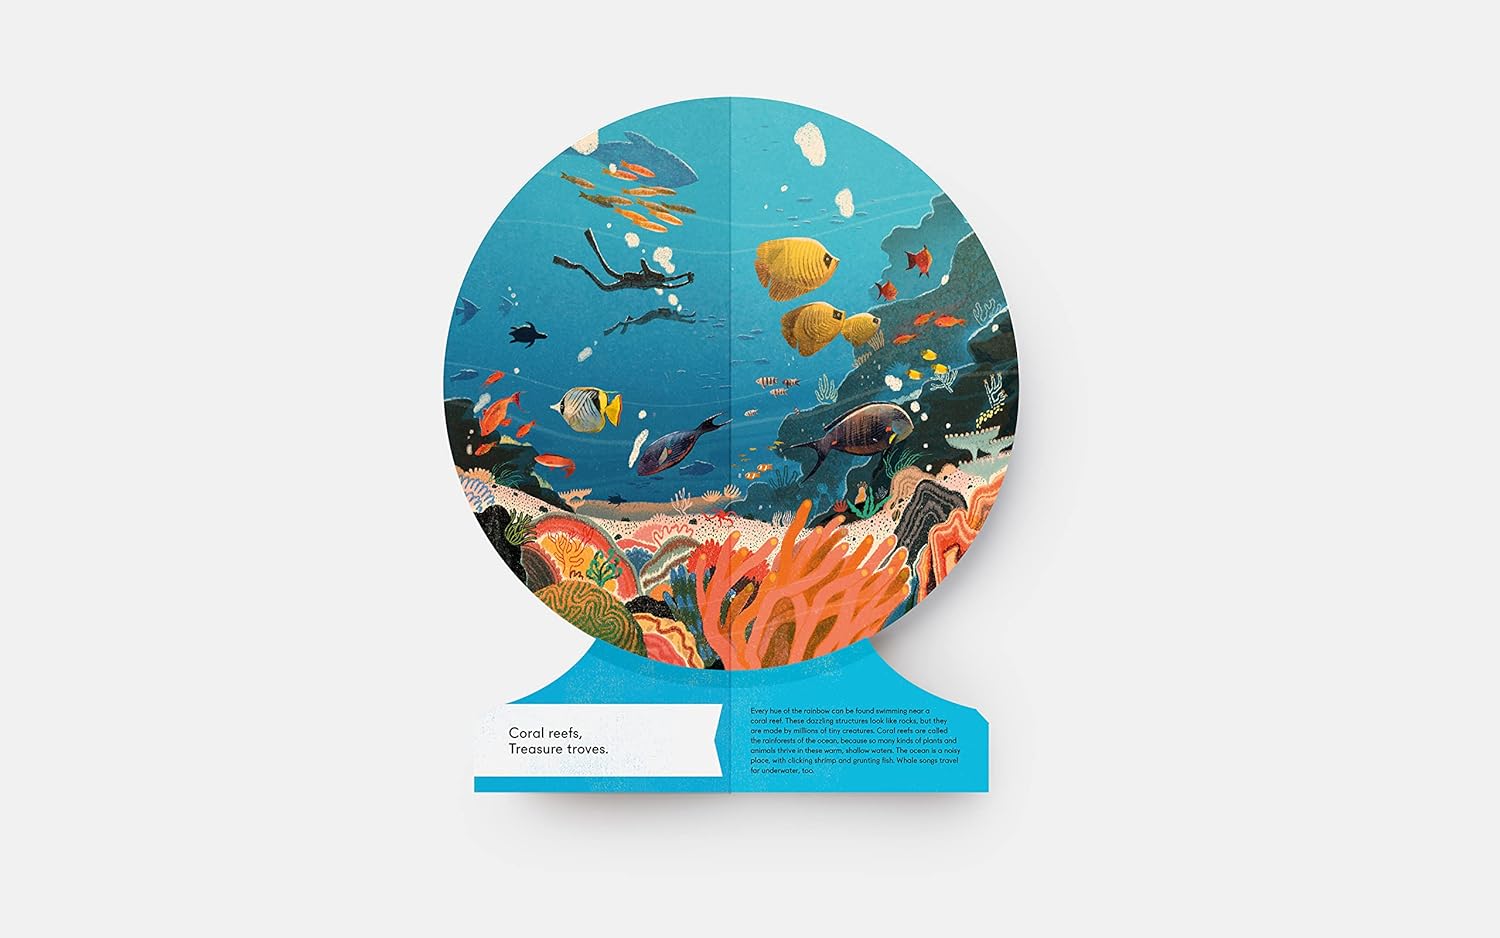 Our Underwater World: A First Dive into Oceans, Lakes, and Rivers by Phaidon Press